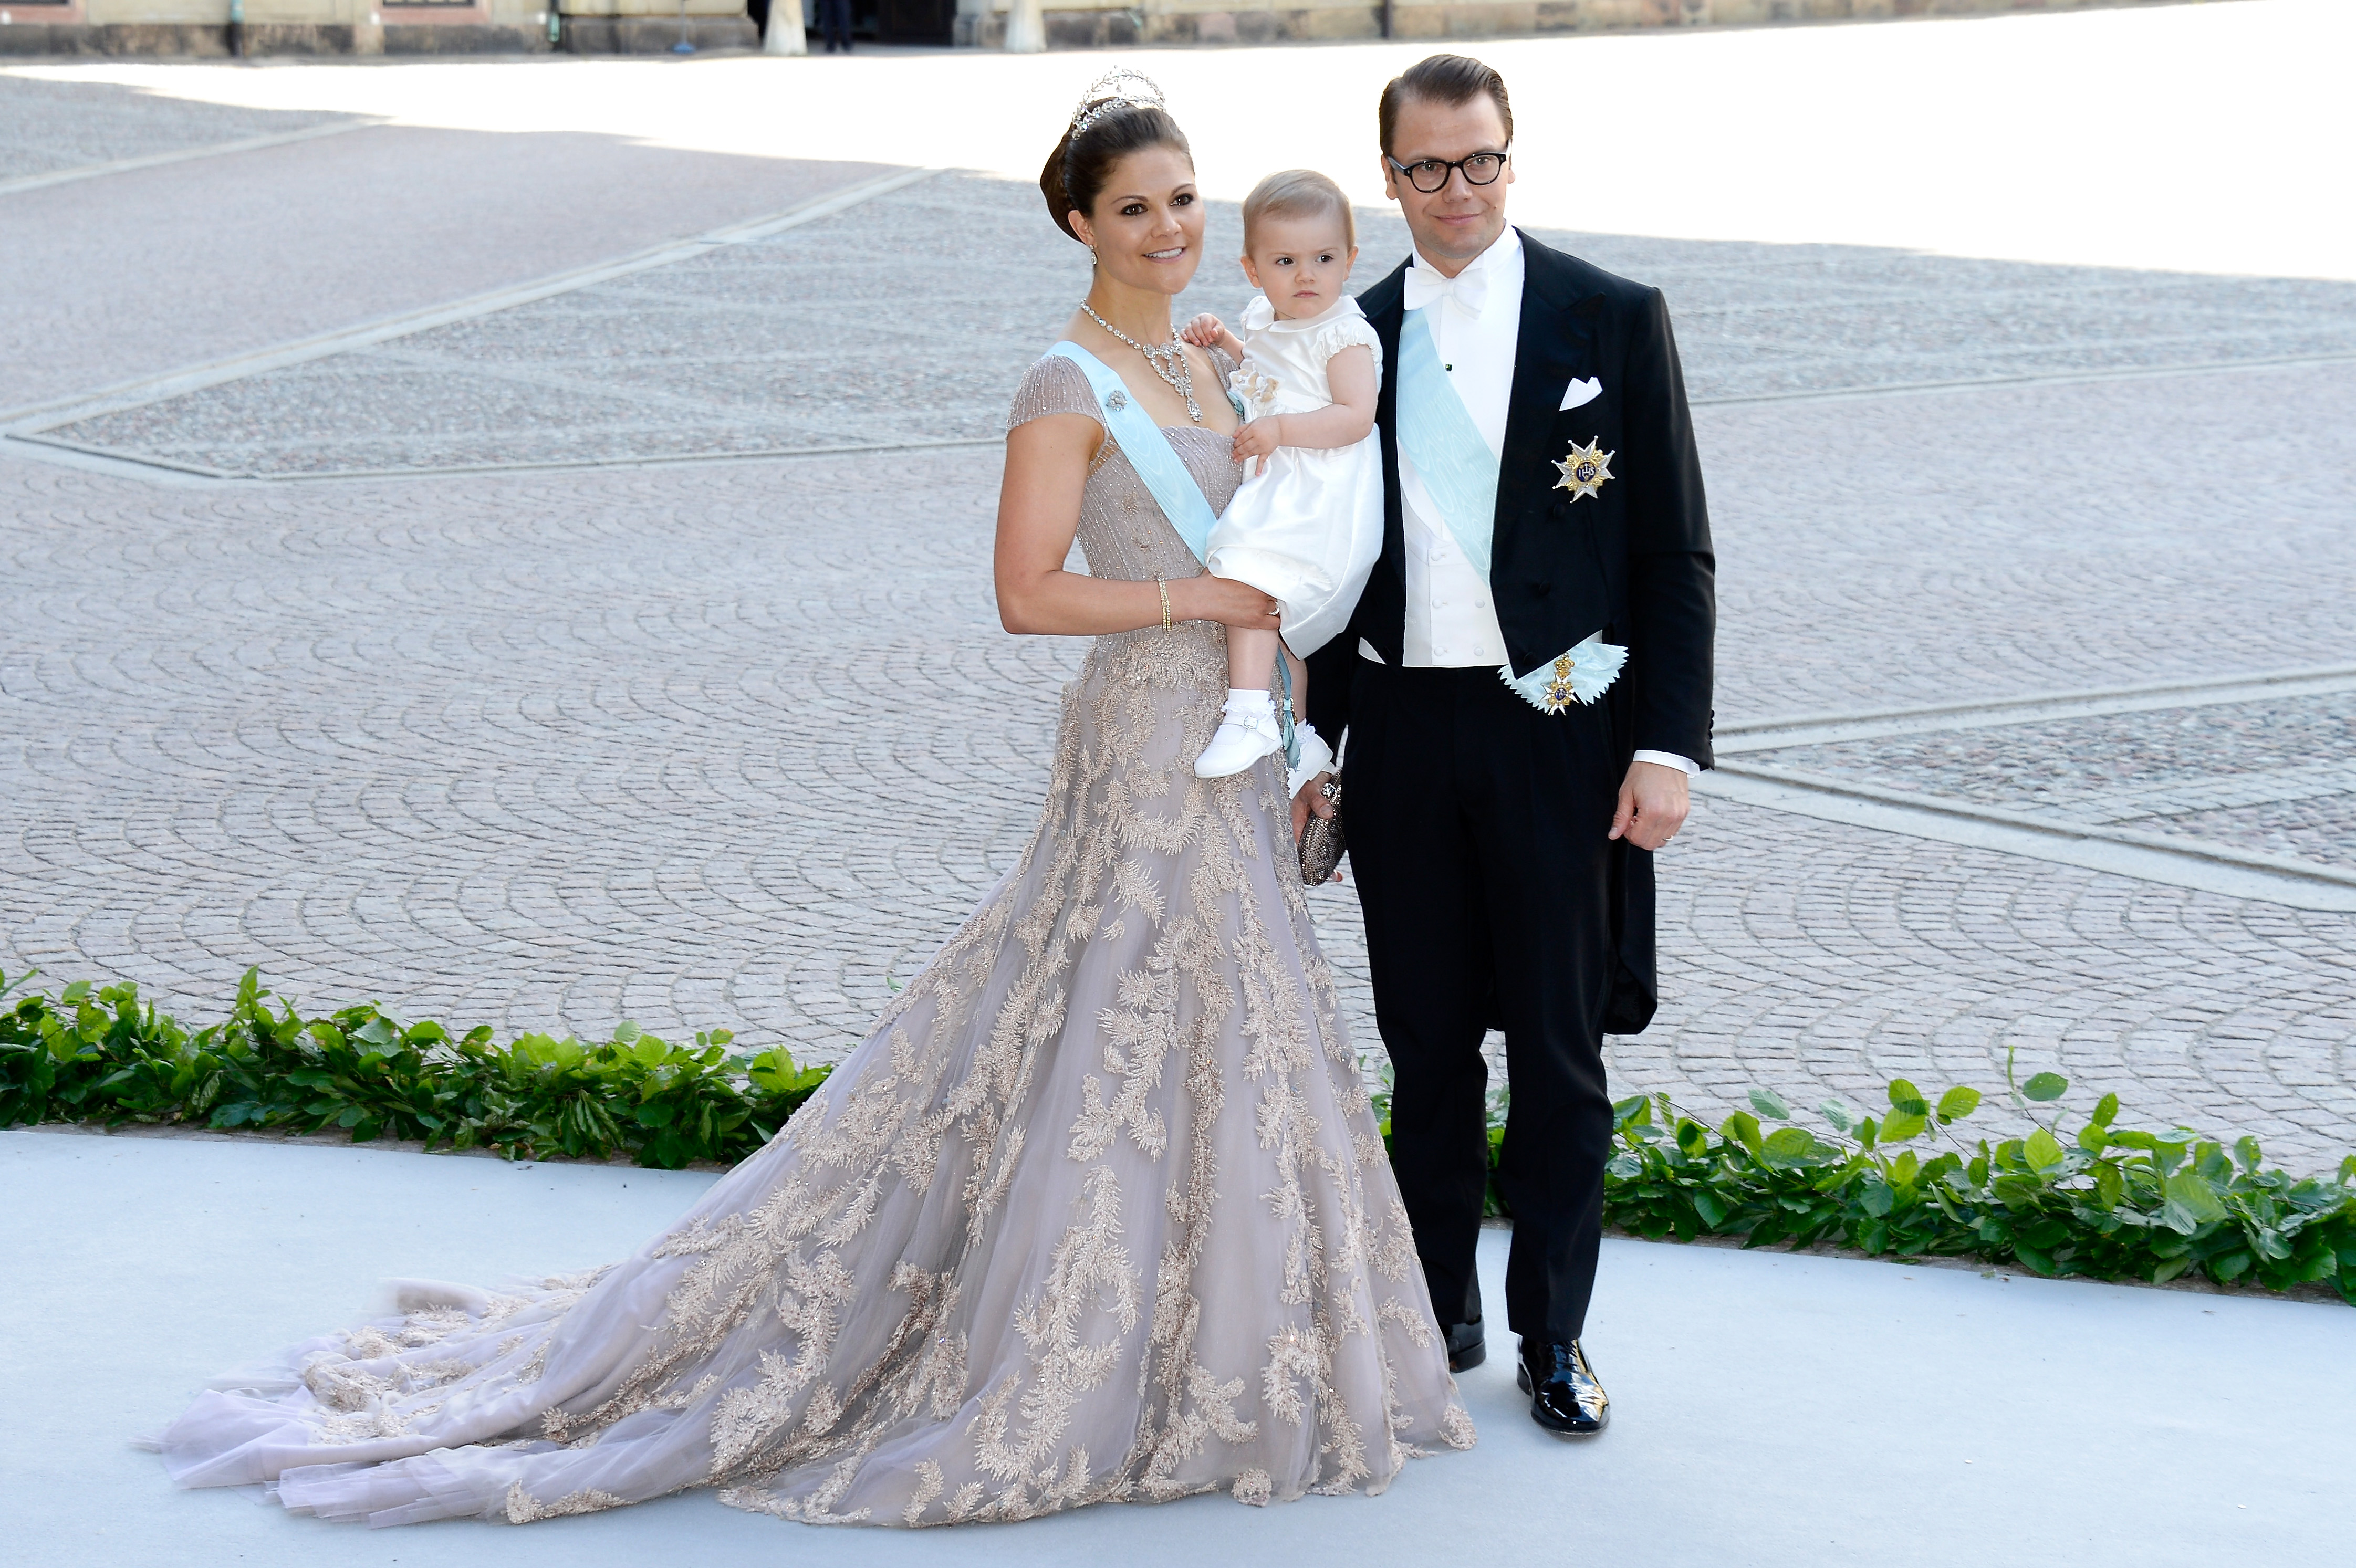 Sweden's Princess Madeleine says 'yes' in wedding to NY banker Christopher O 'Neill